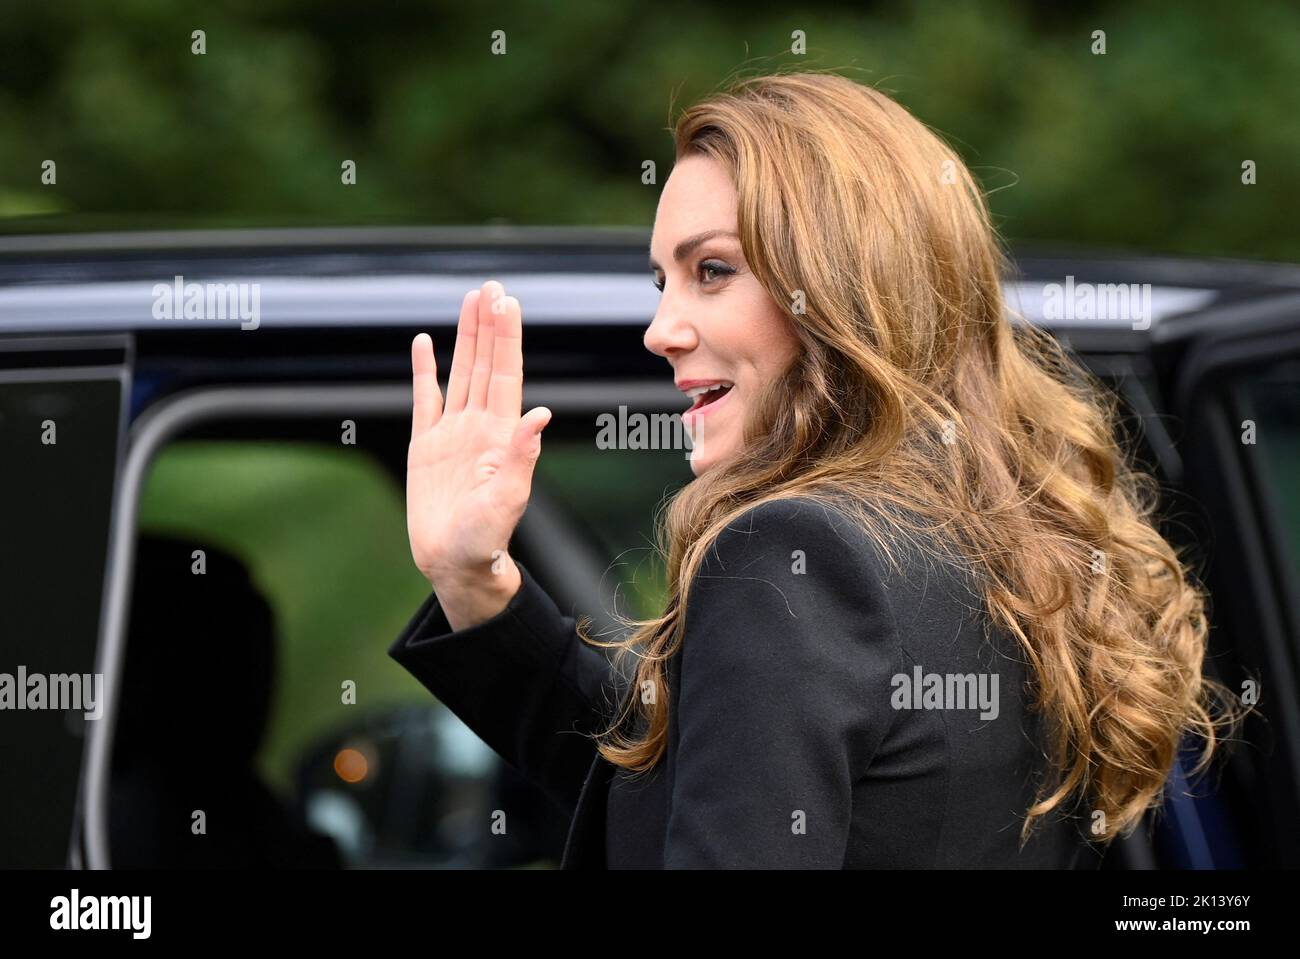 The Princess of Wales waves as she leaves after viewing floral tributes left by members of the public at the gates of Sandringham House in Norfolk, following the death of Queen Elizabeth II. Picture date: Thursday September 15, 2022. Stock Photo